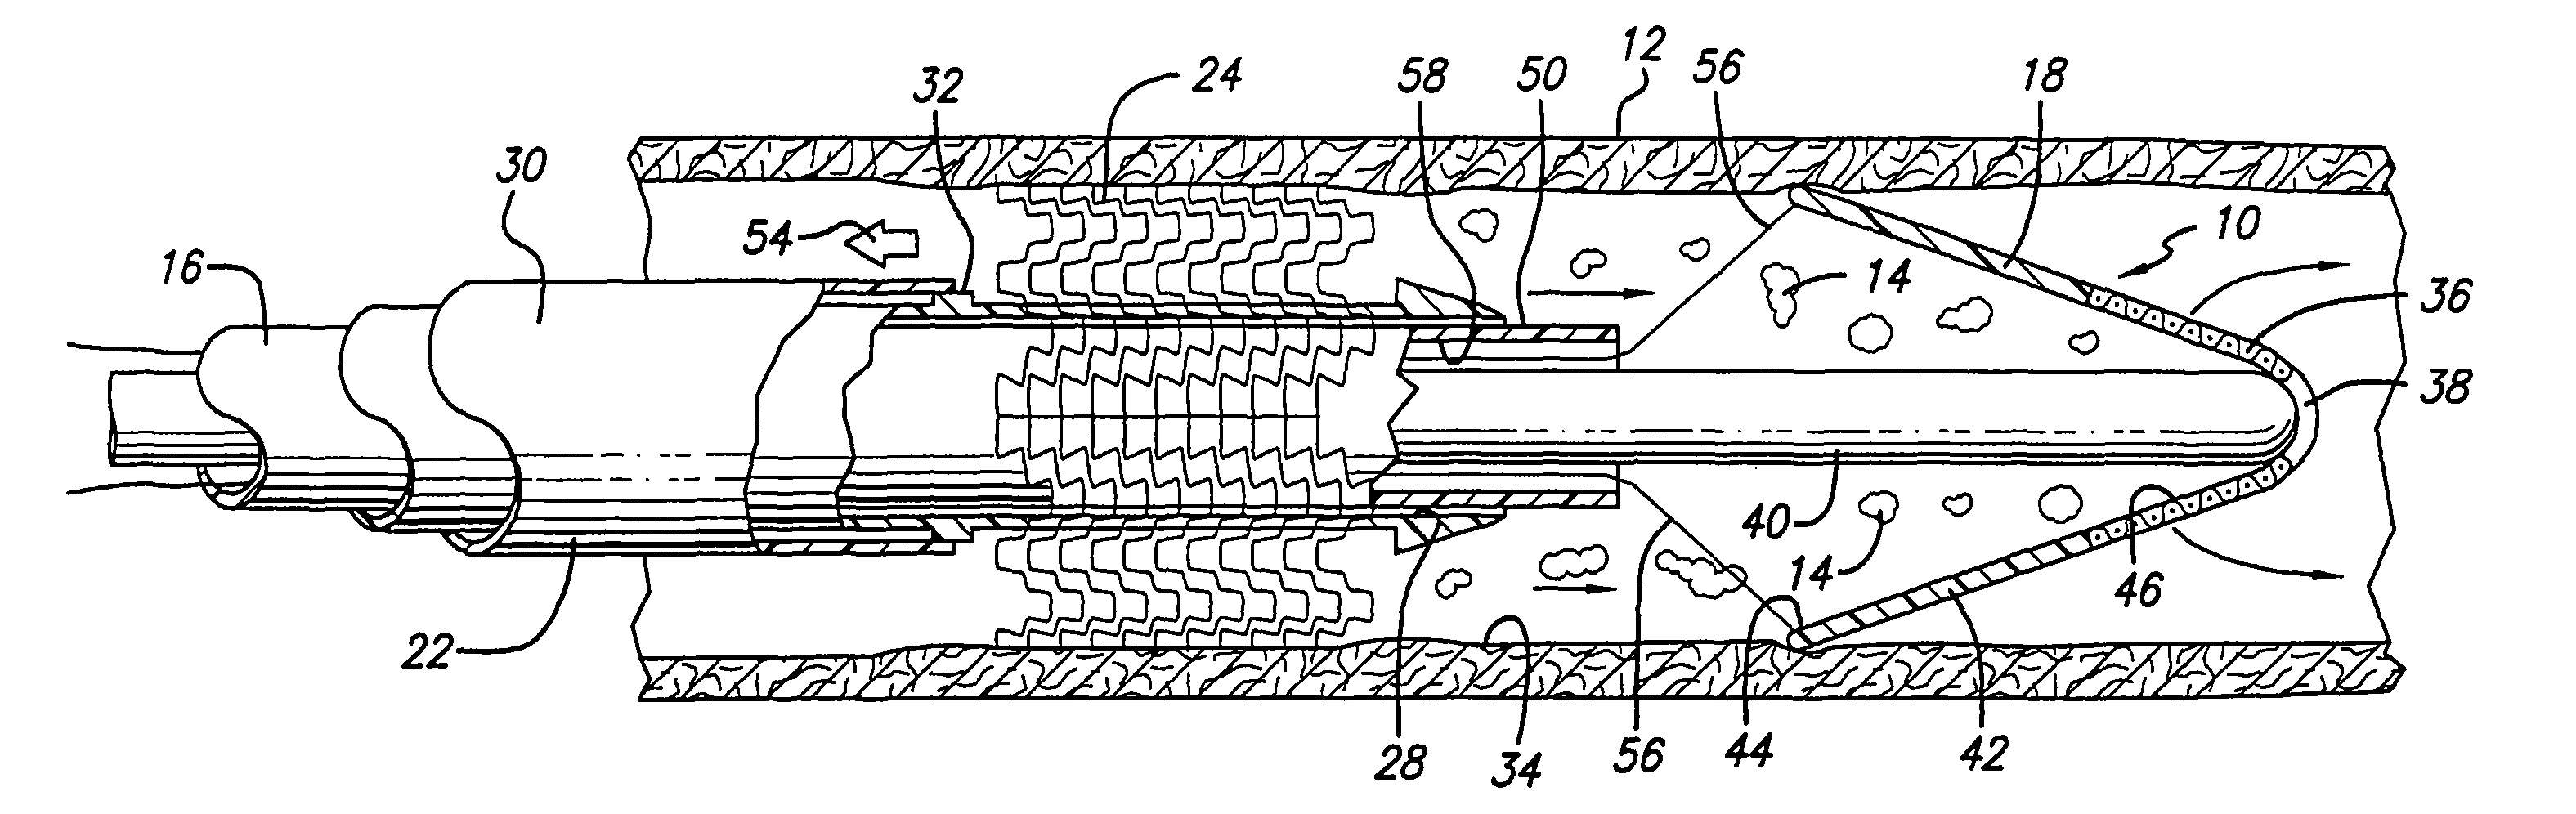 Device for, and method of, blocking emboli in vessels such as blood arteries